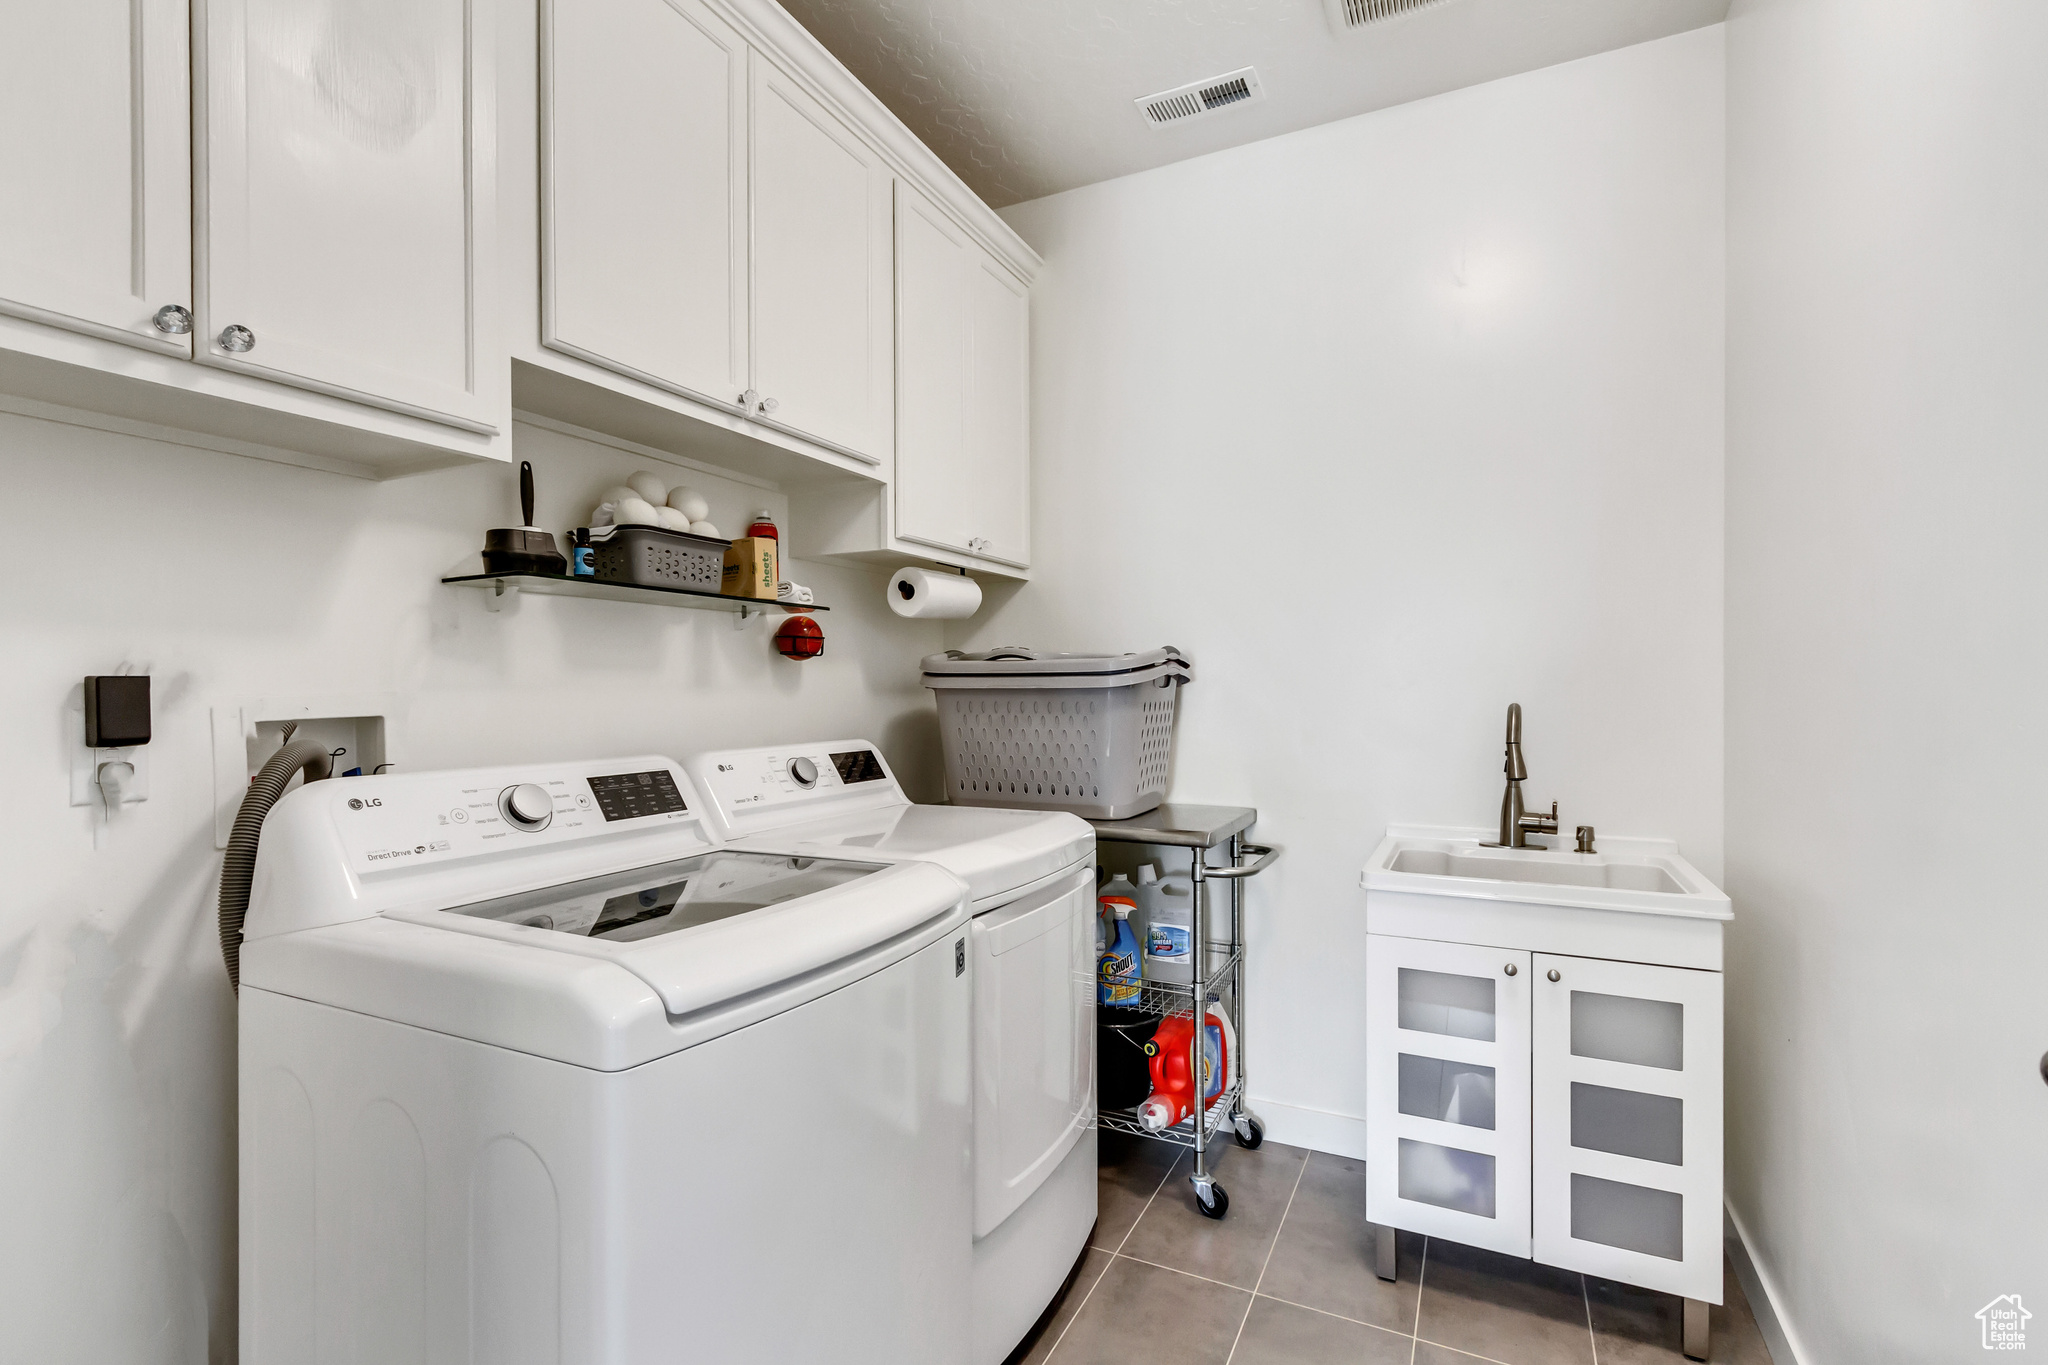 Laundry room with sink, cabinets, light tile floors, and extra storage